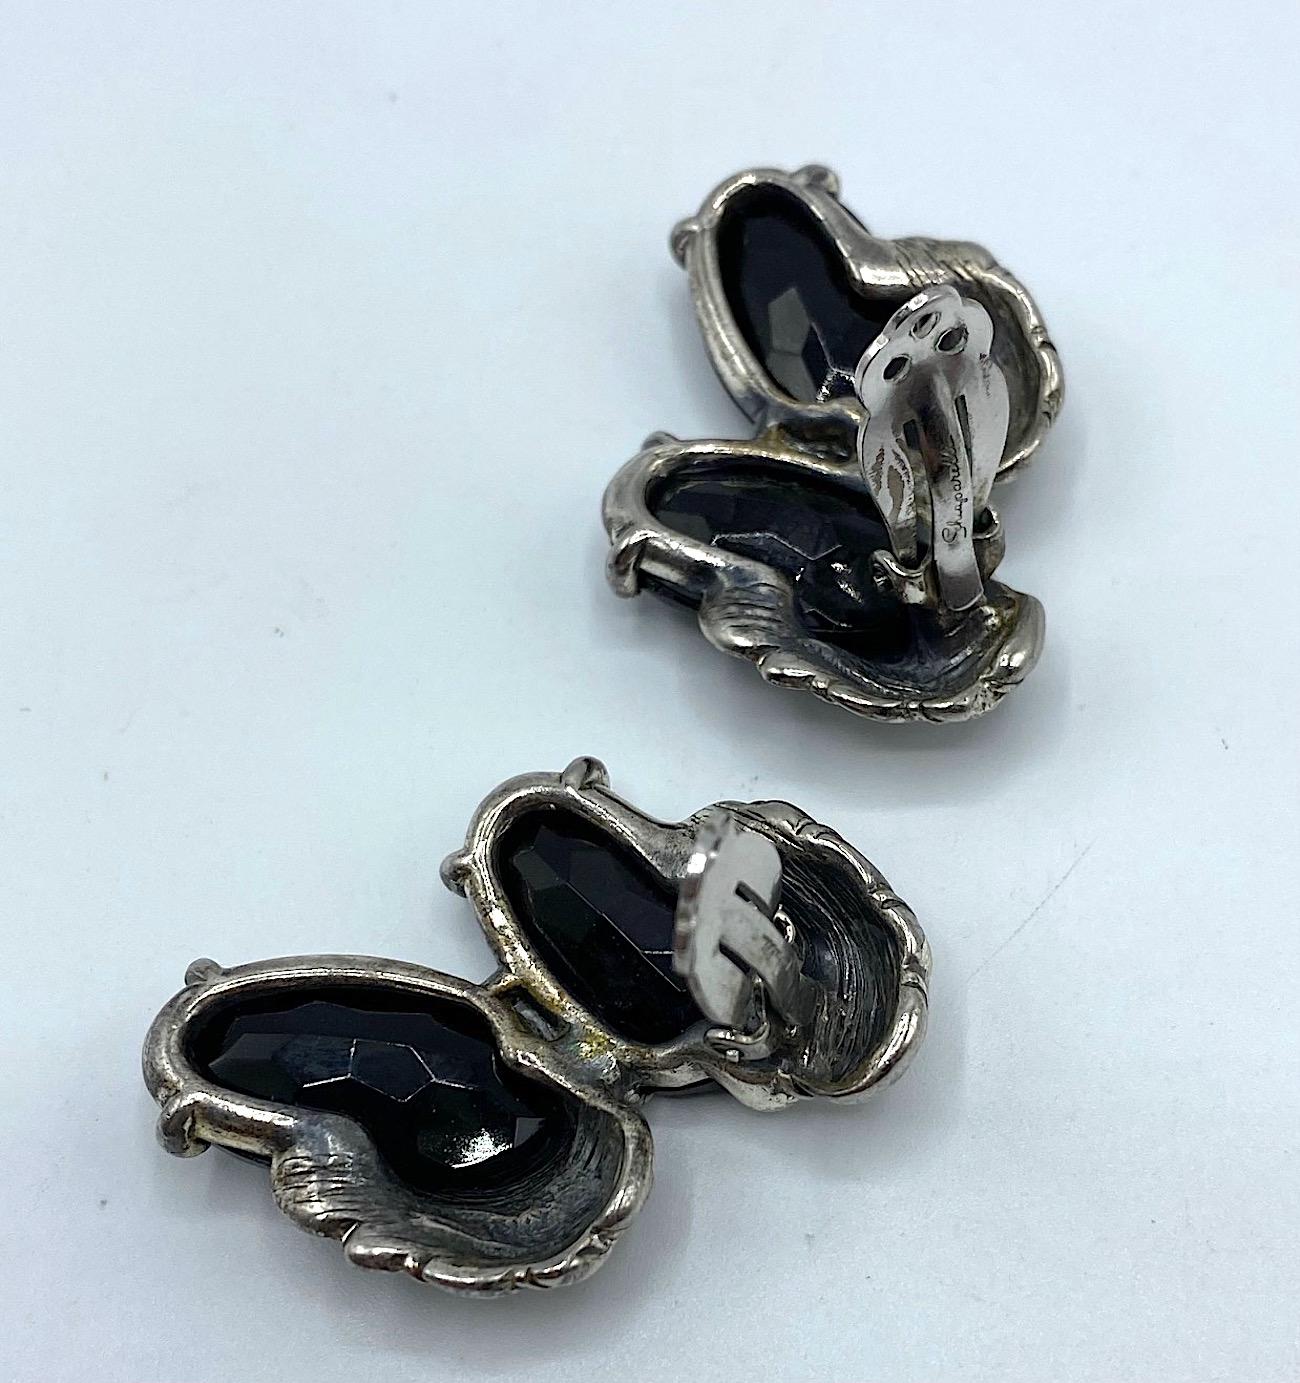 Schiaparelli 1950s Silver Leaves and Oval Black Stone Bracelet and Earrings Set 7